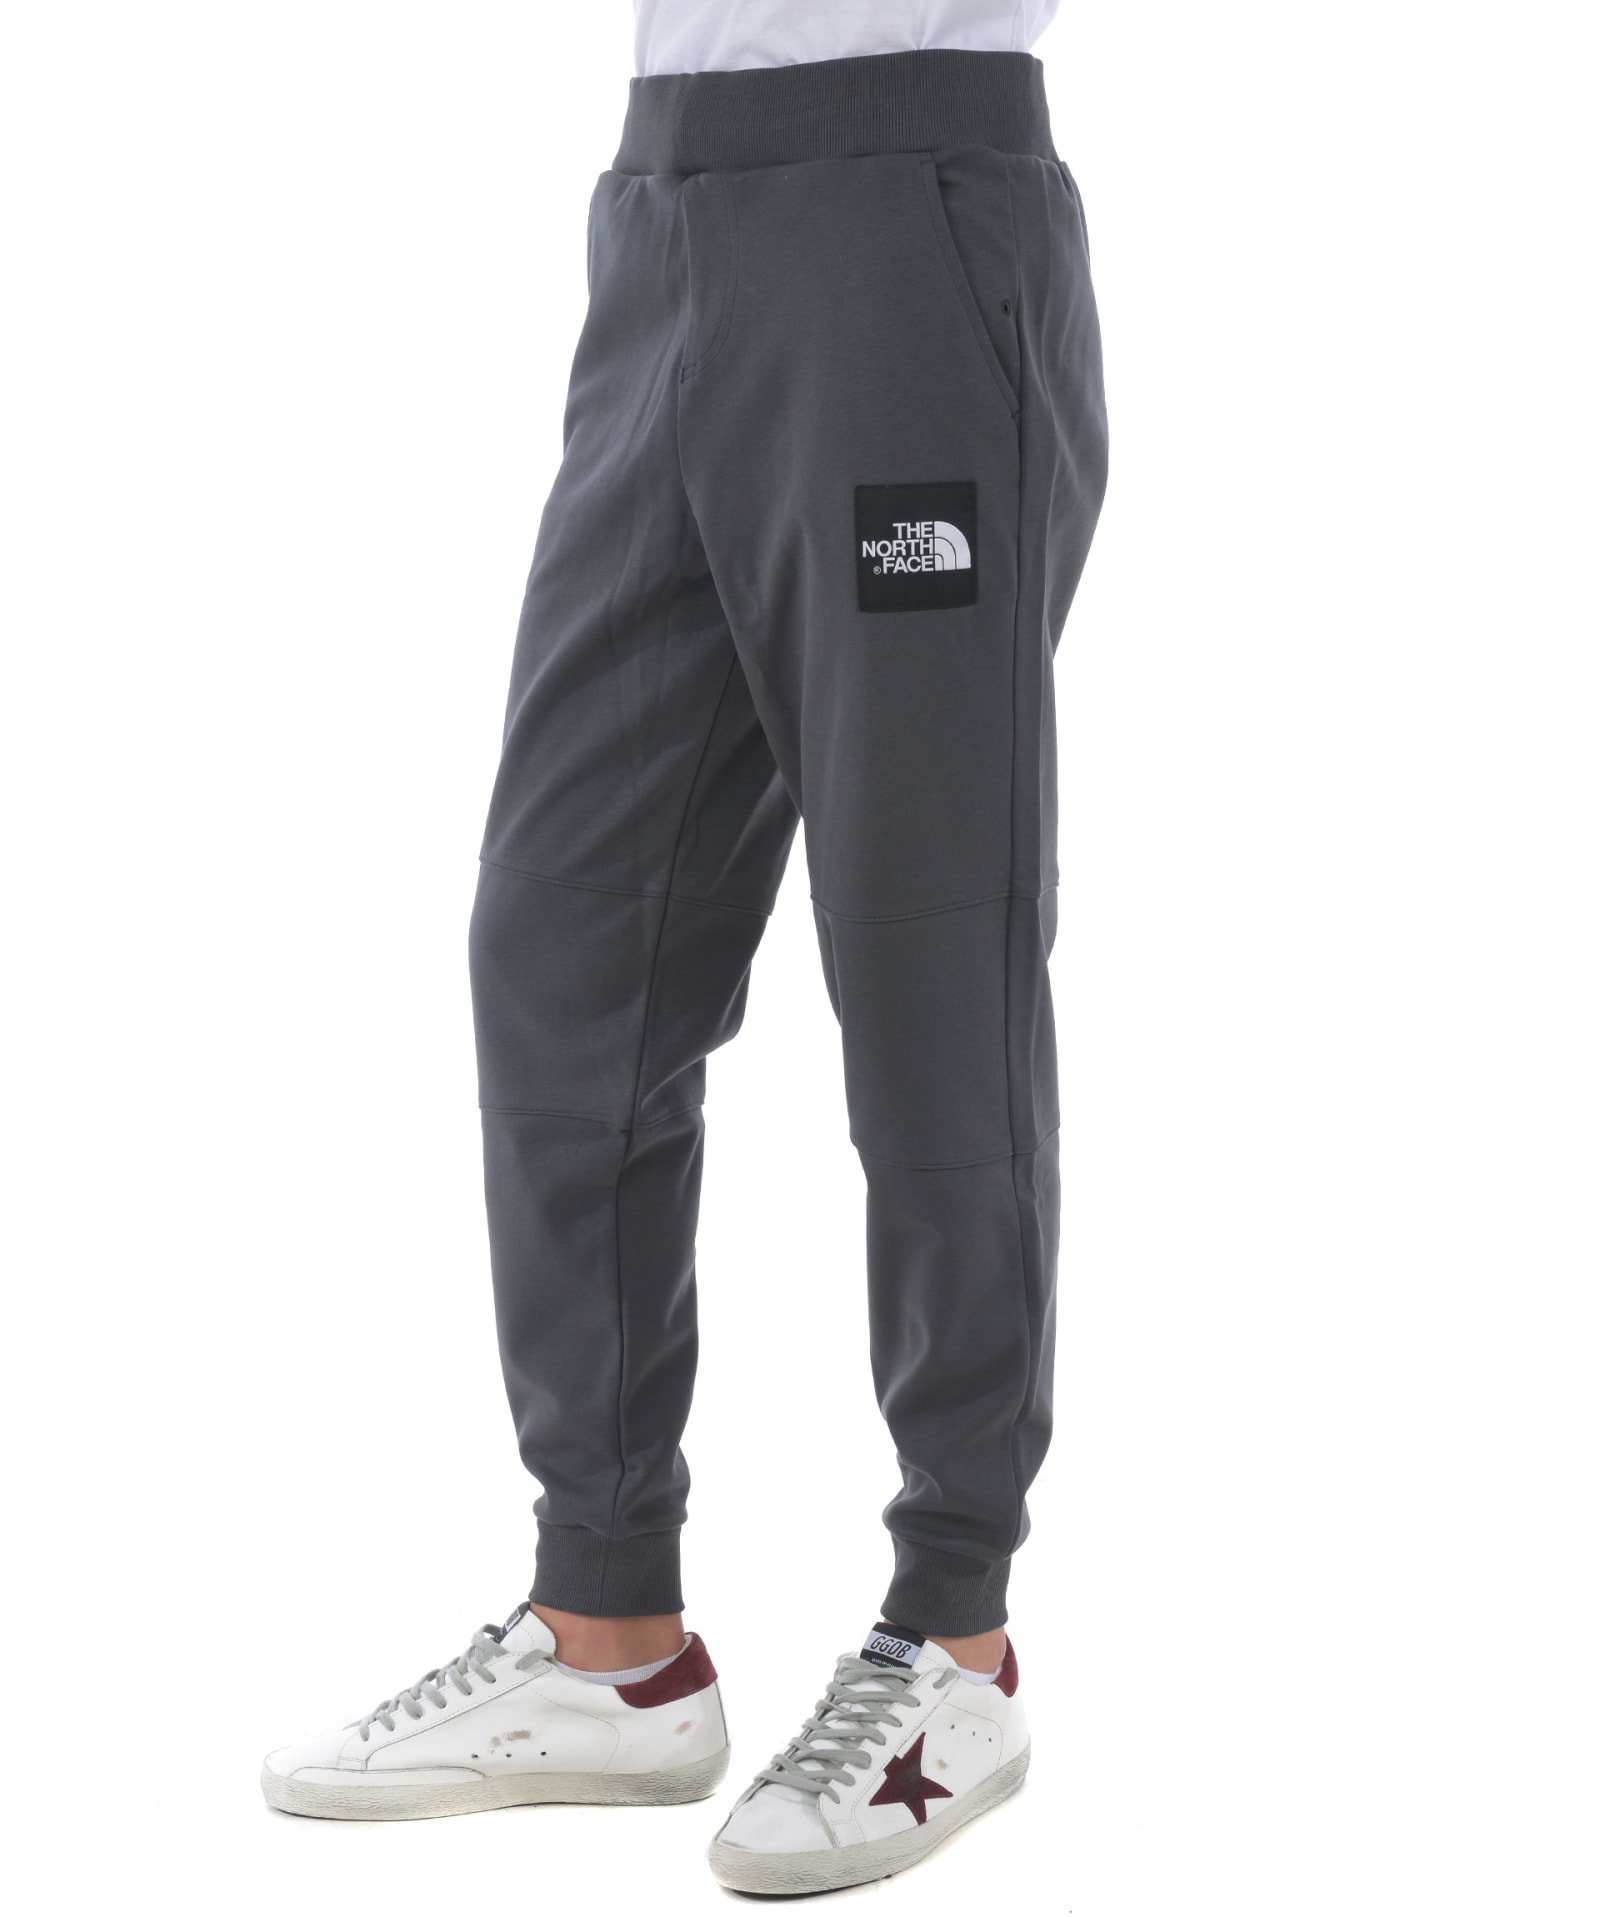 The North Face Logo Patch Track Pants - Grigio scuro - 10756475 | italist